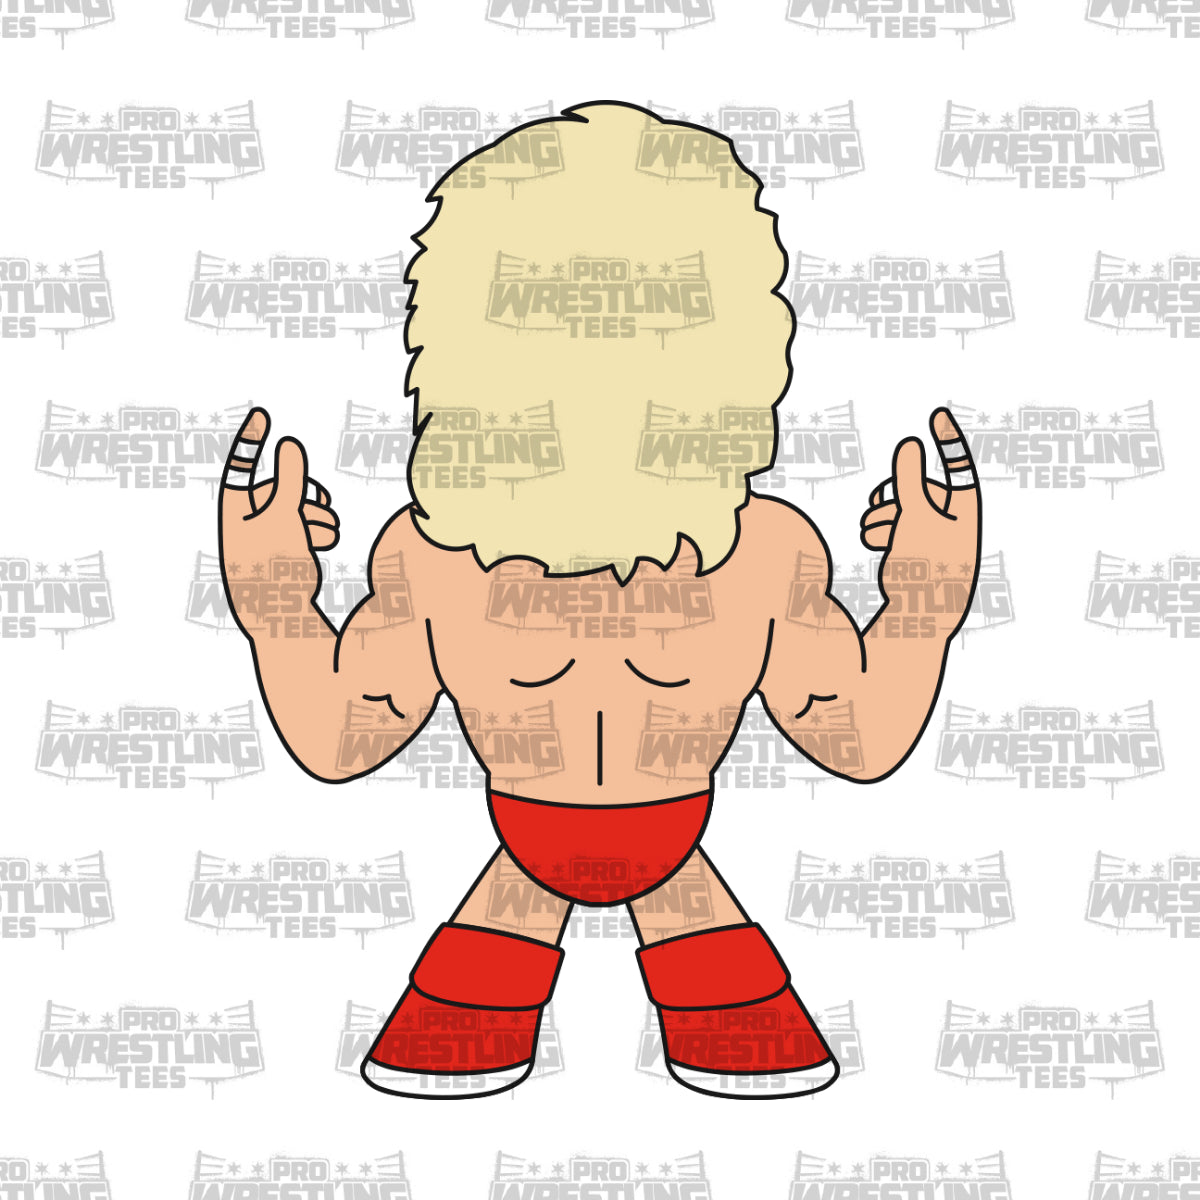 2022 Pro Wrestling Tees Micro Brawlers Limited Edition Ric Flair [Bloody]